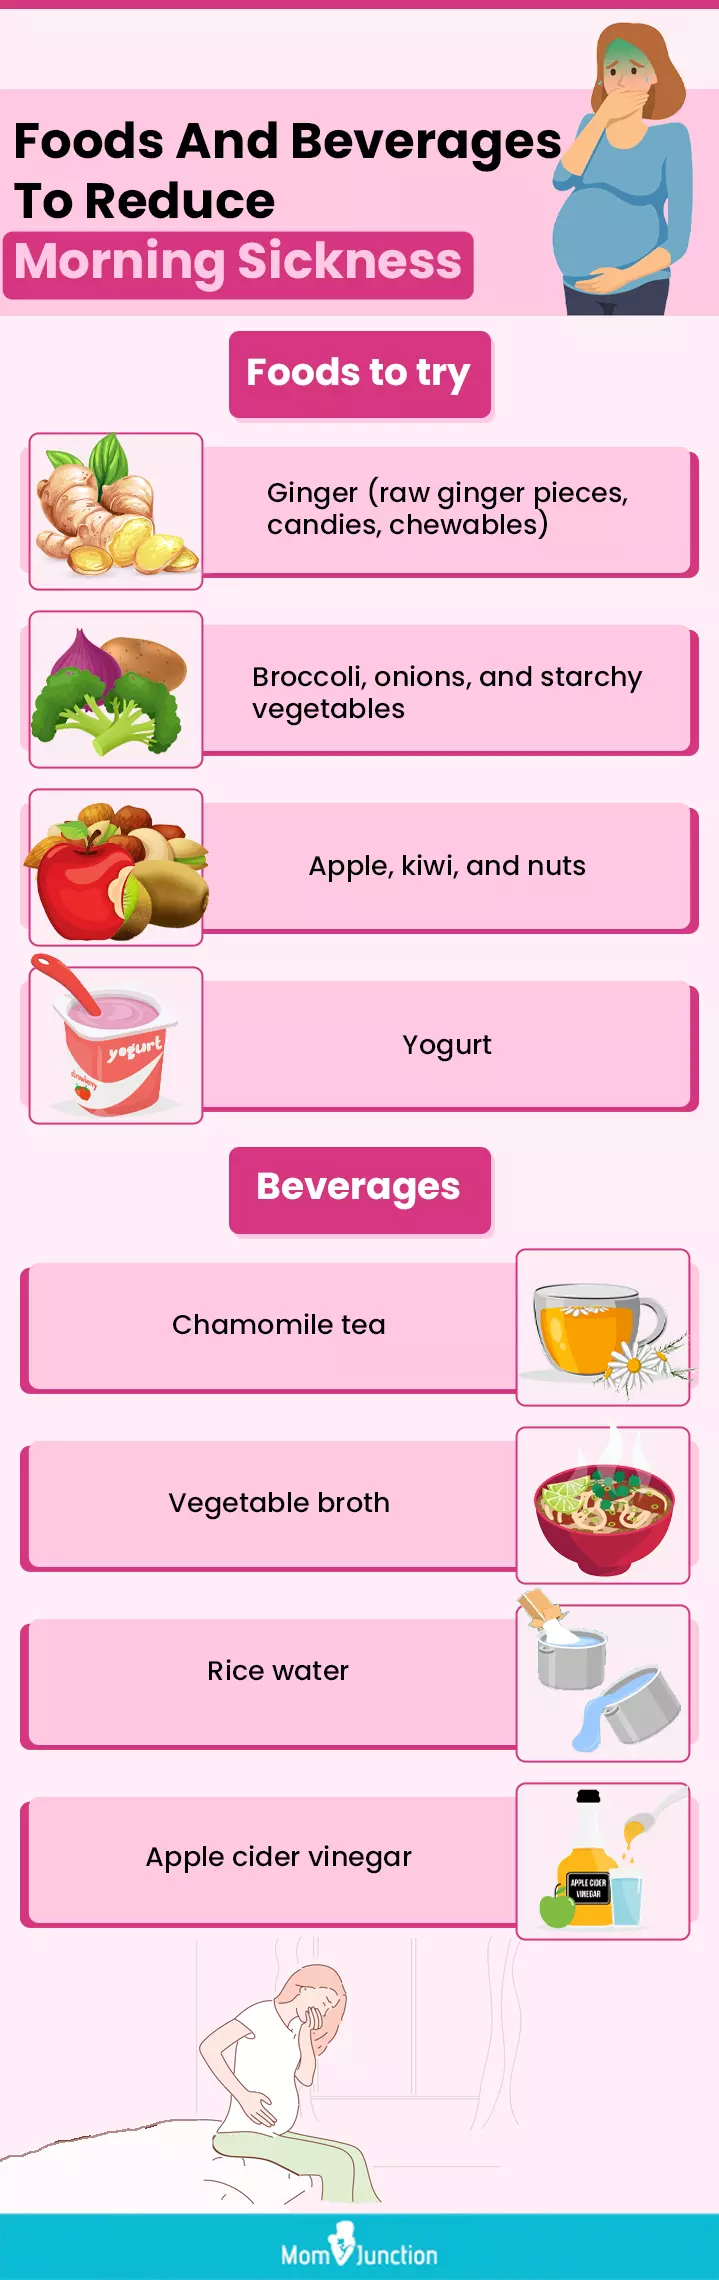 foods and beverages to reduce morning sickness (infographic)